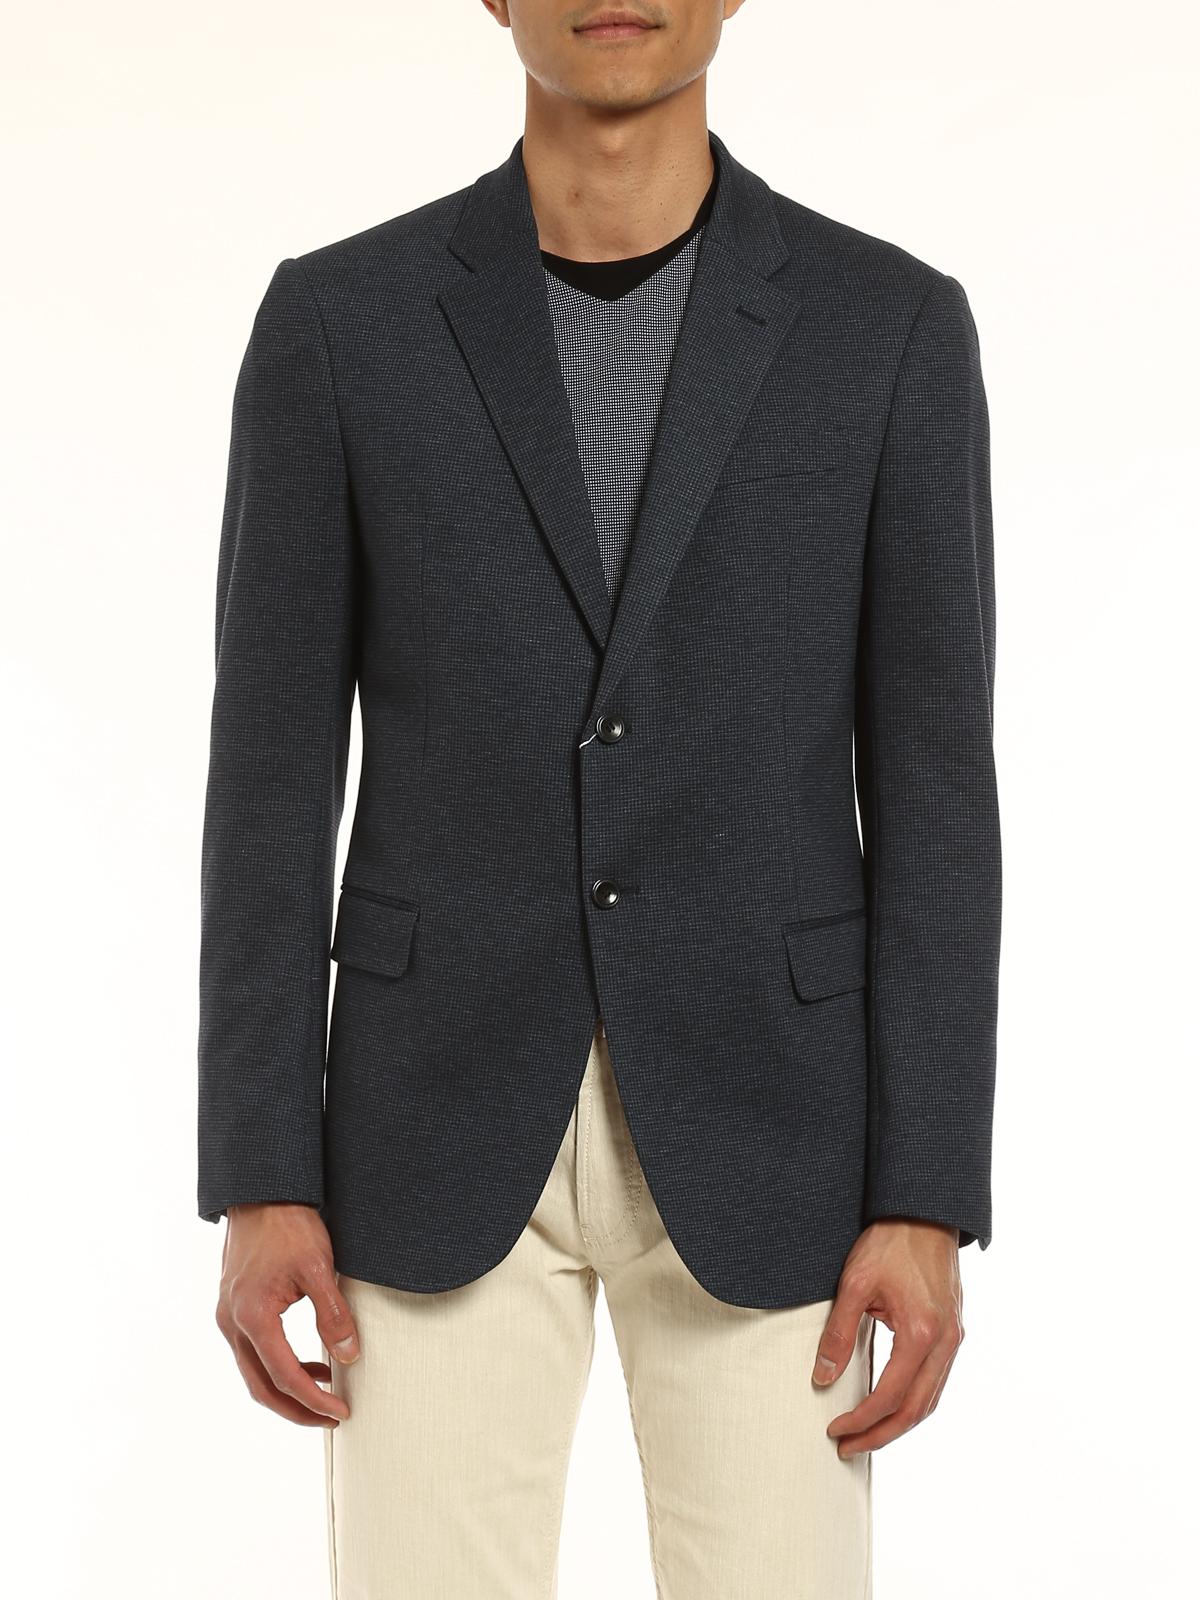 Armani Micro Jacquard Jacket in Blue for Men - Lyst